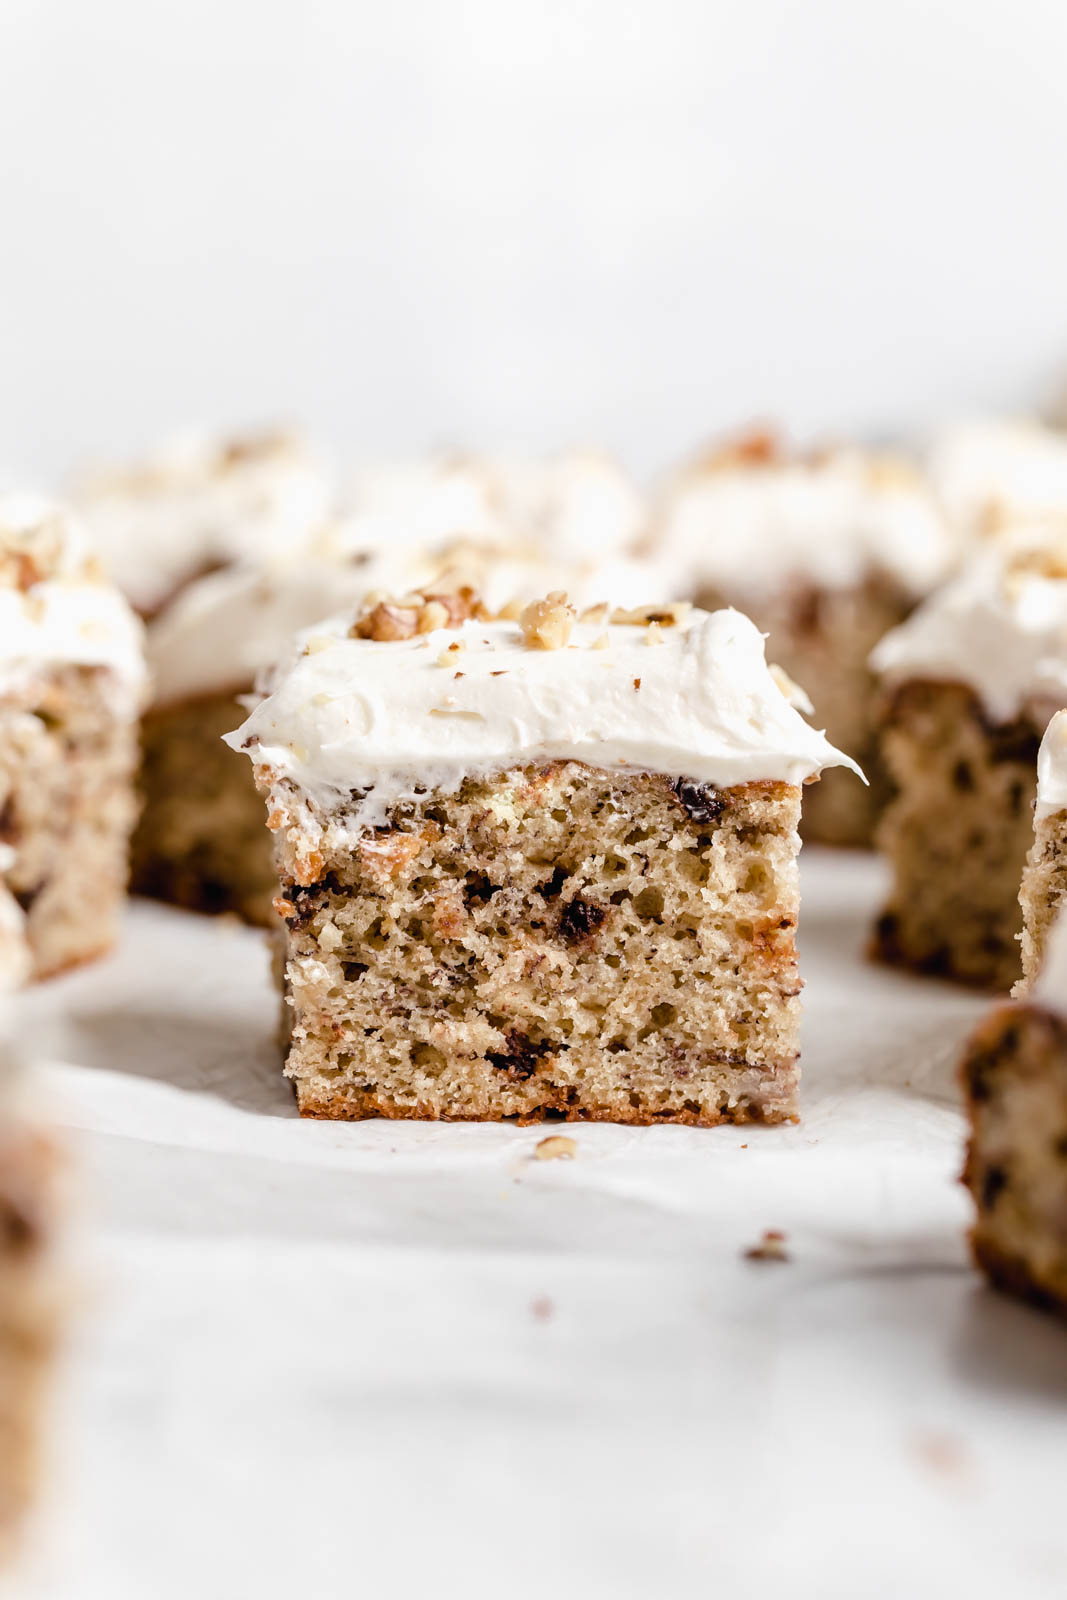 Fluffy and moist brown butter banana cake with cream cheese frosting. YUM.